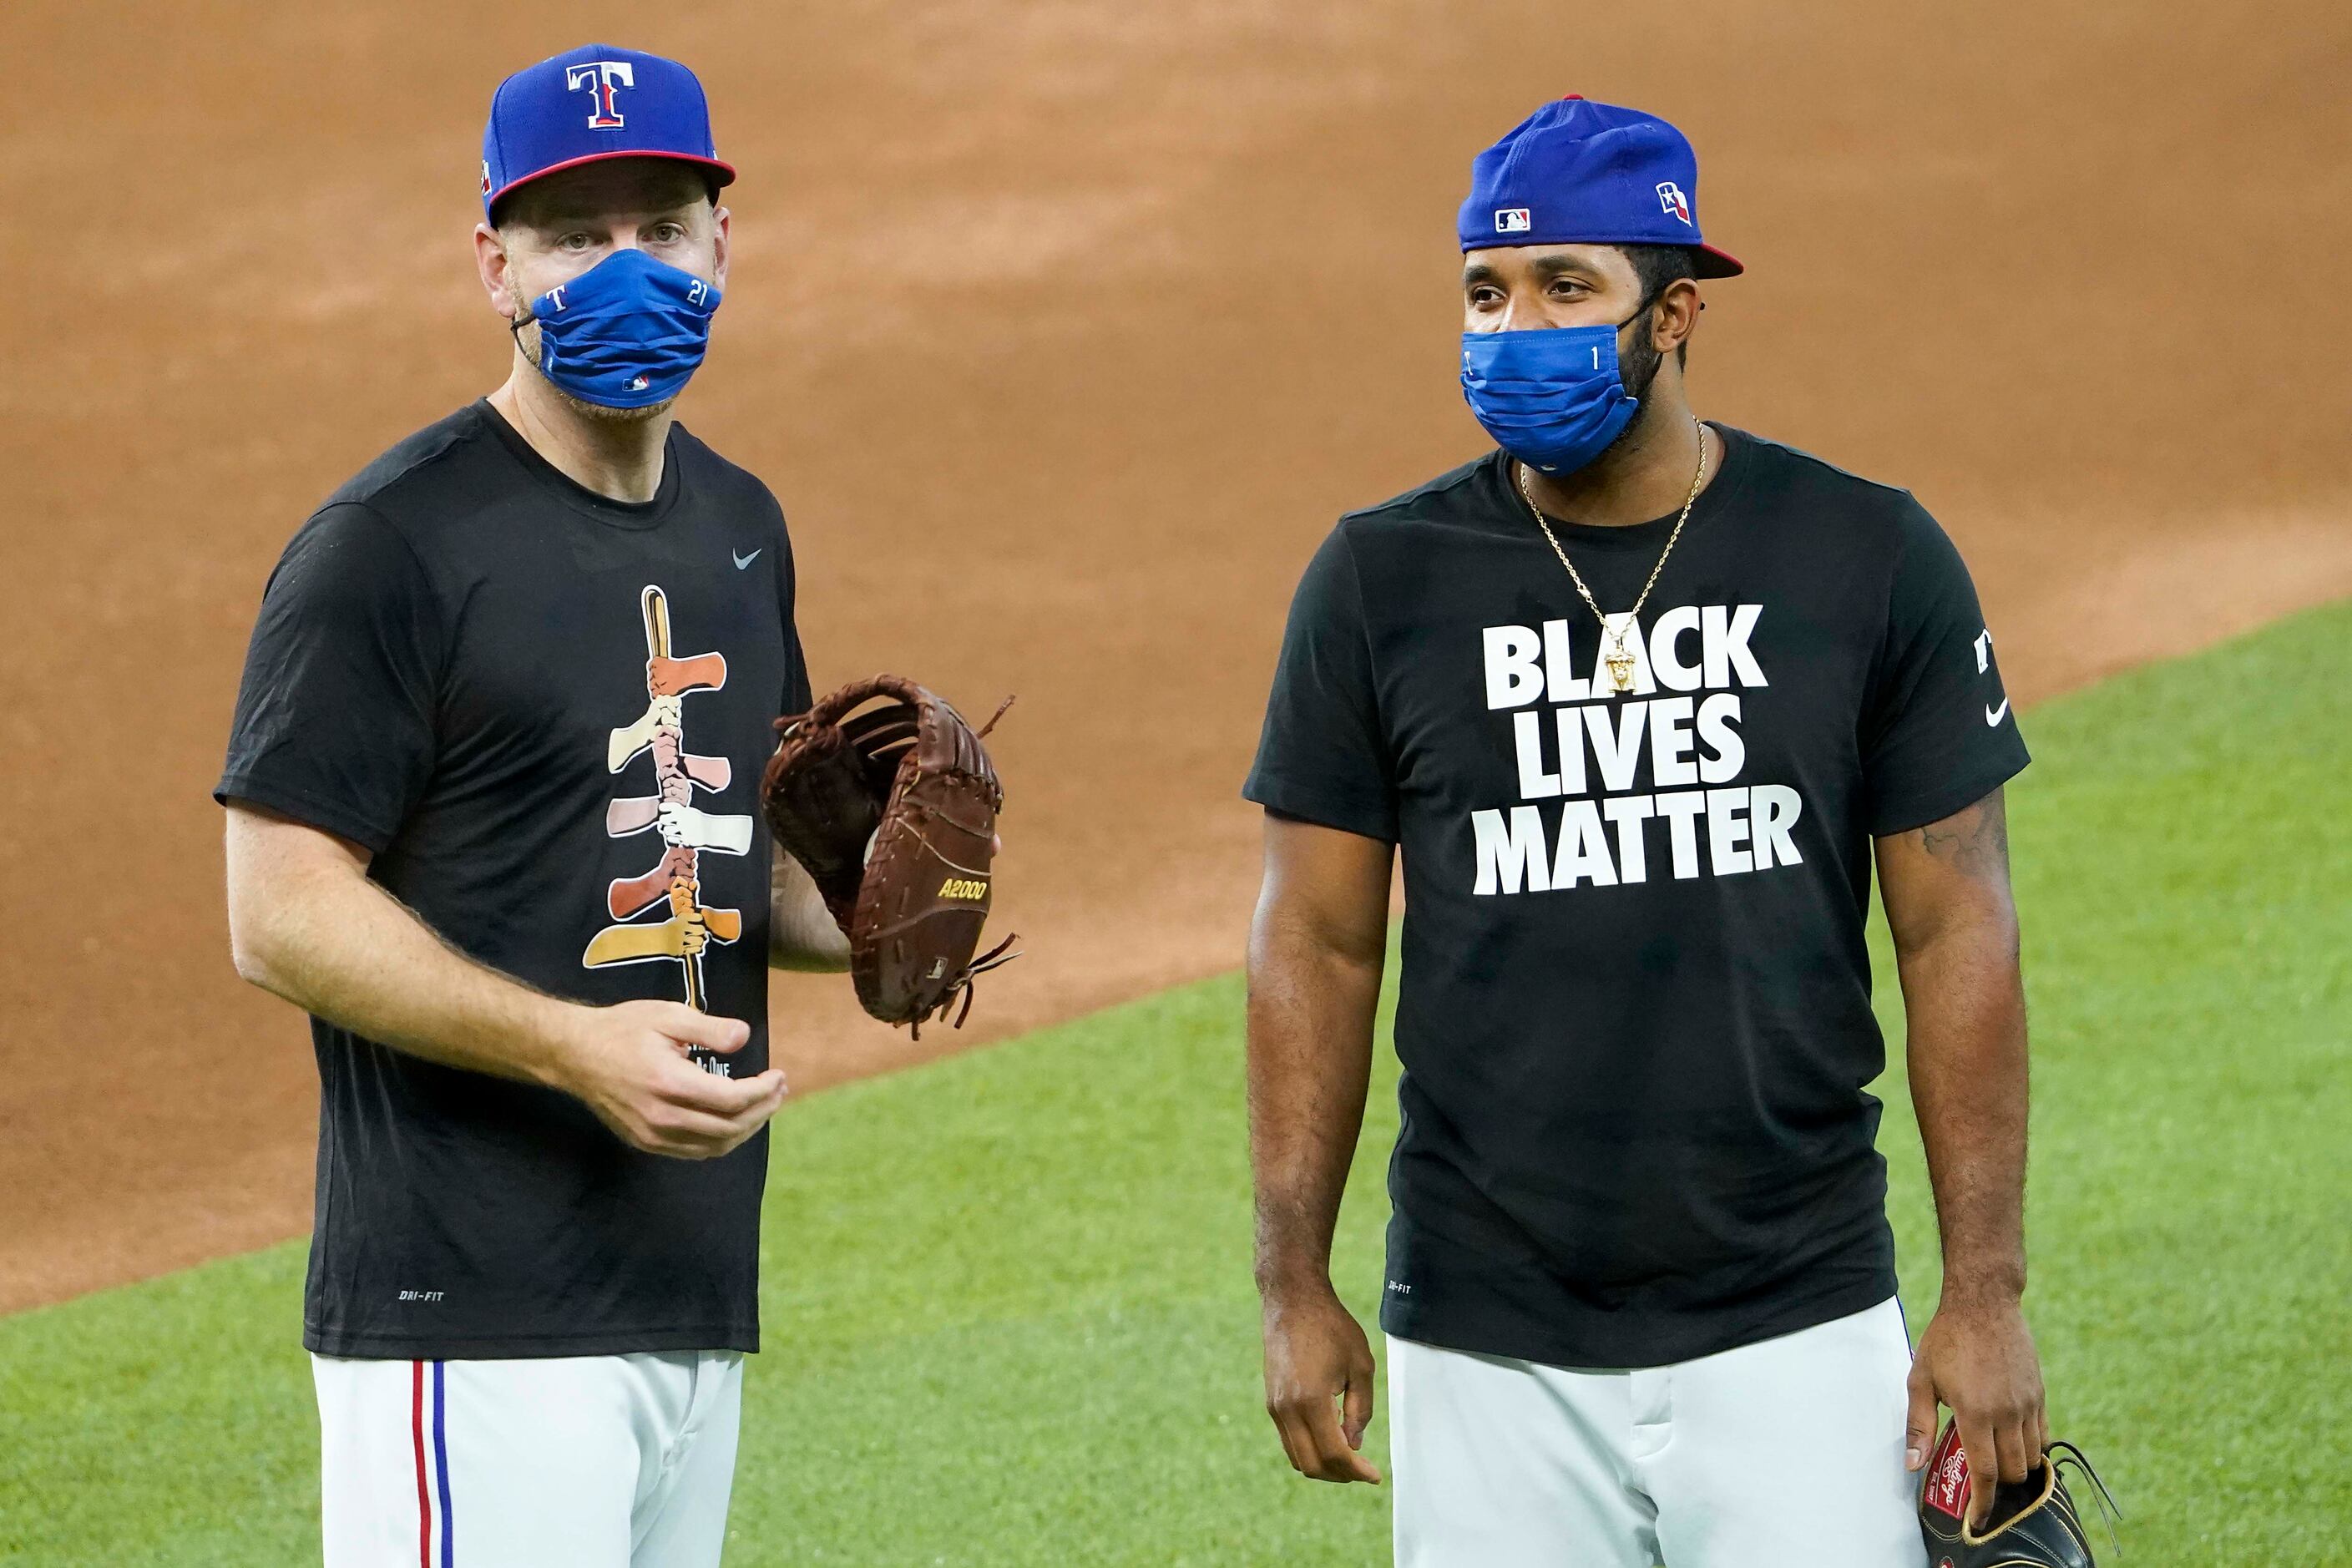 Todd Frazier (left) and Elvis Andrus wear t-shirts in support of racial justice as they warm...